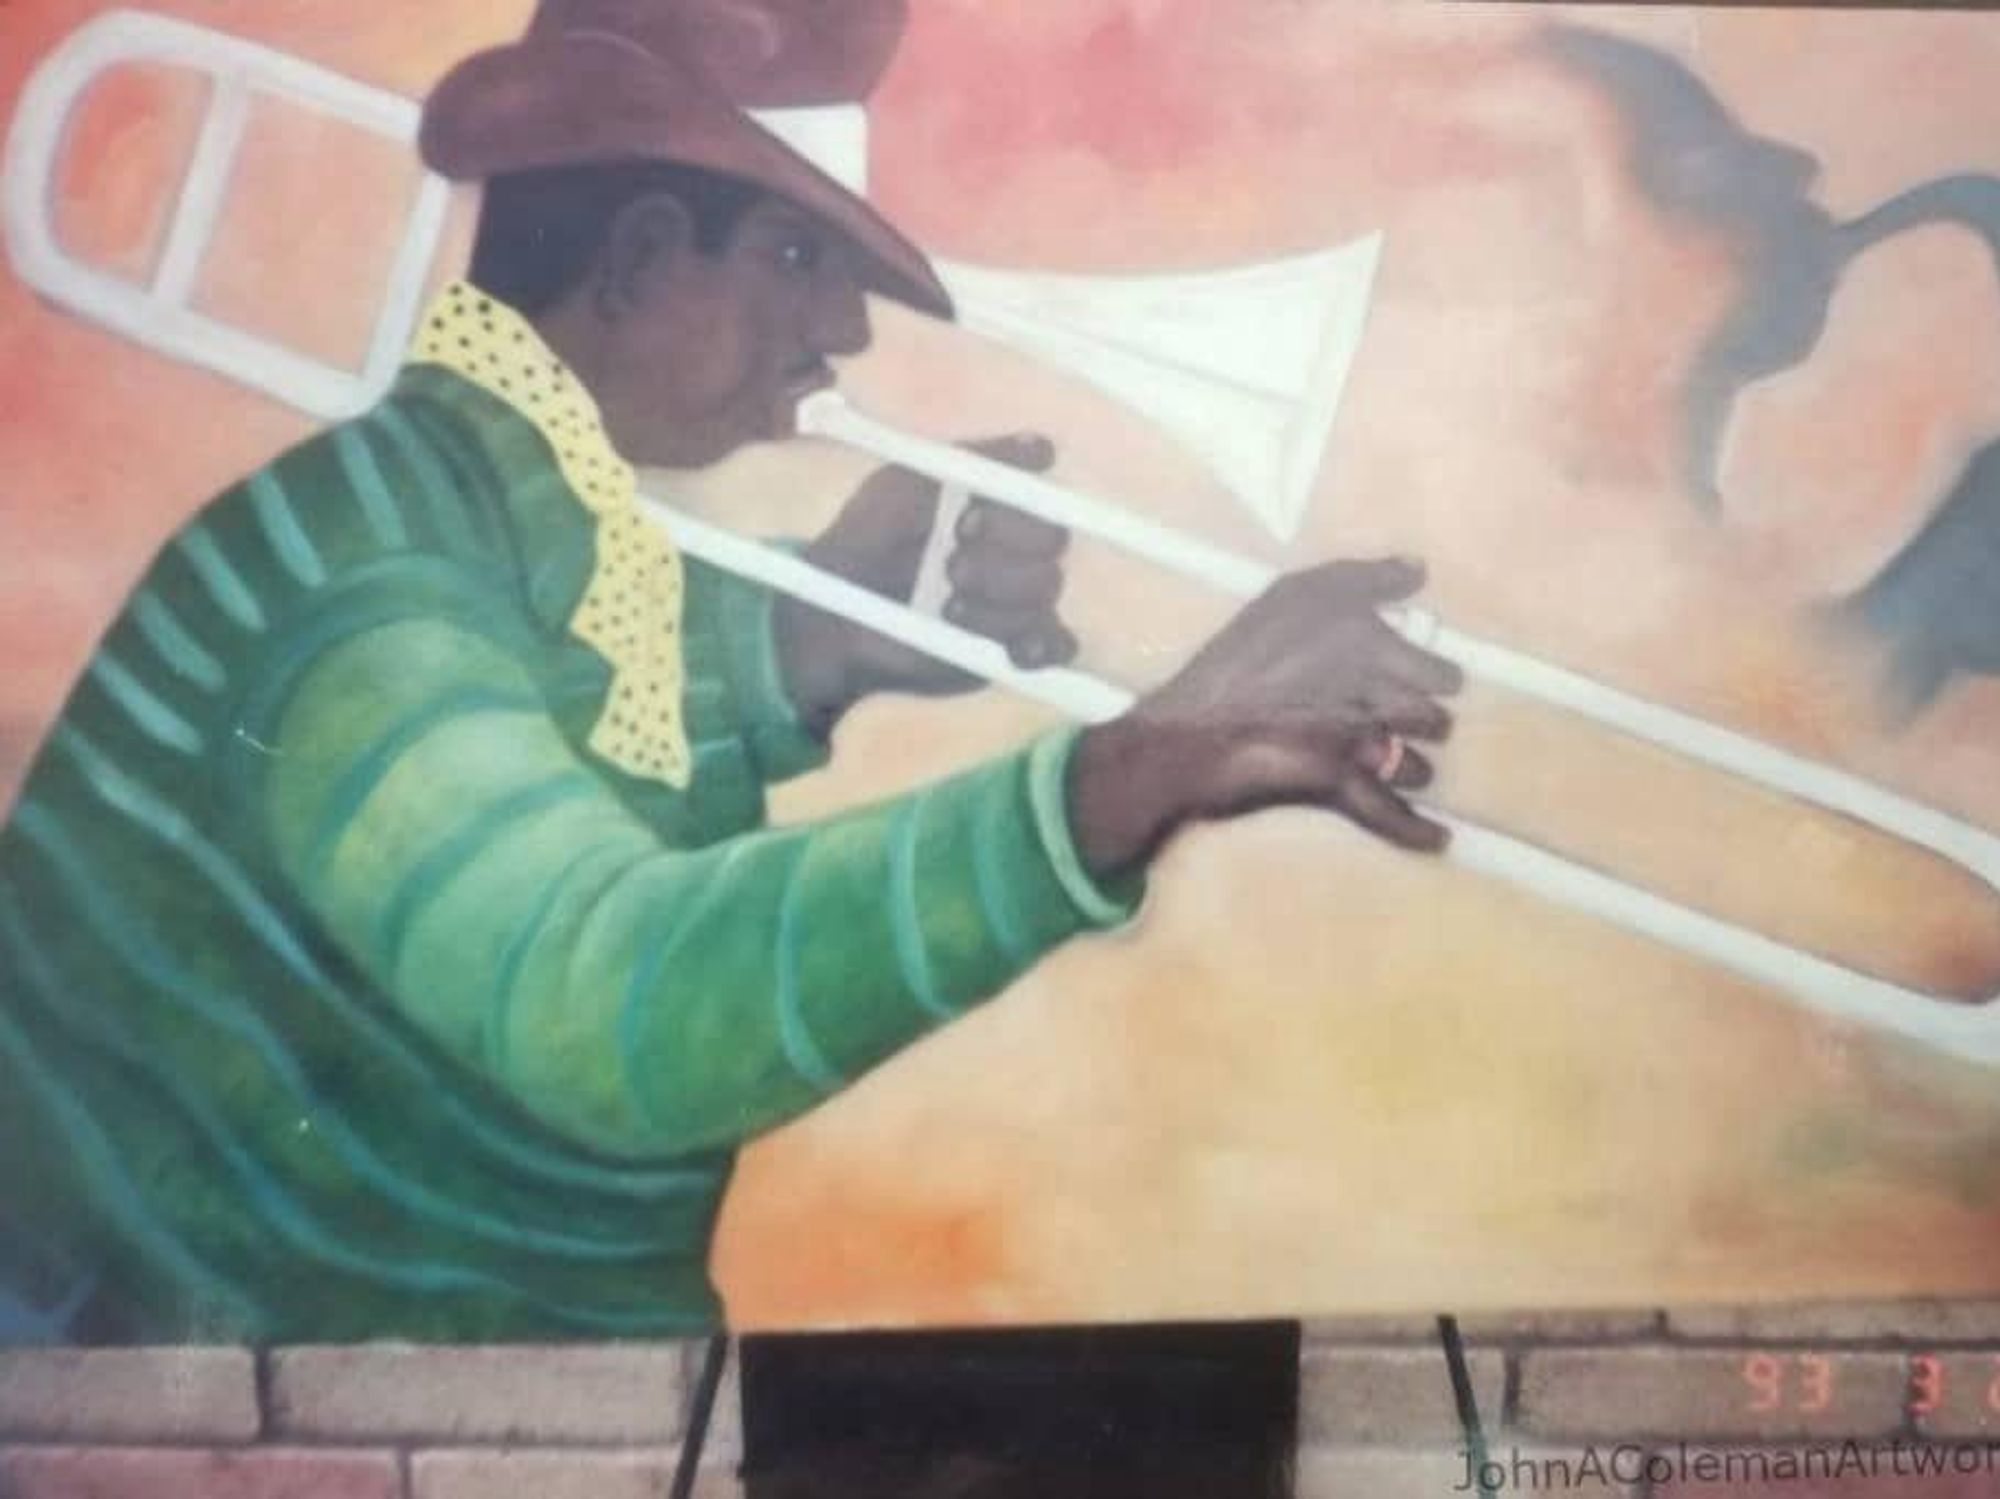 Influenced by Cubism’s geometric depiction of humans and other forms, works by John A. Coleman will be on display at the Carver Cultural Community Center starting this month.